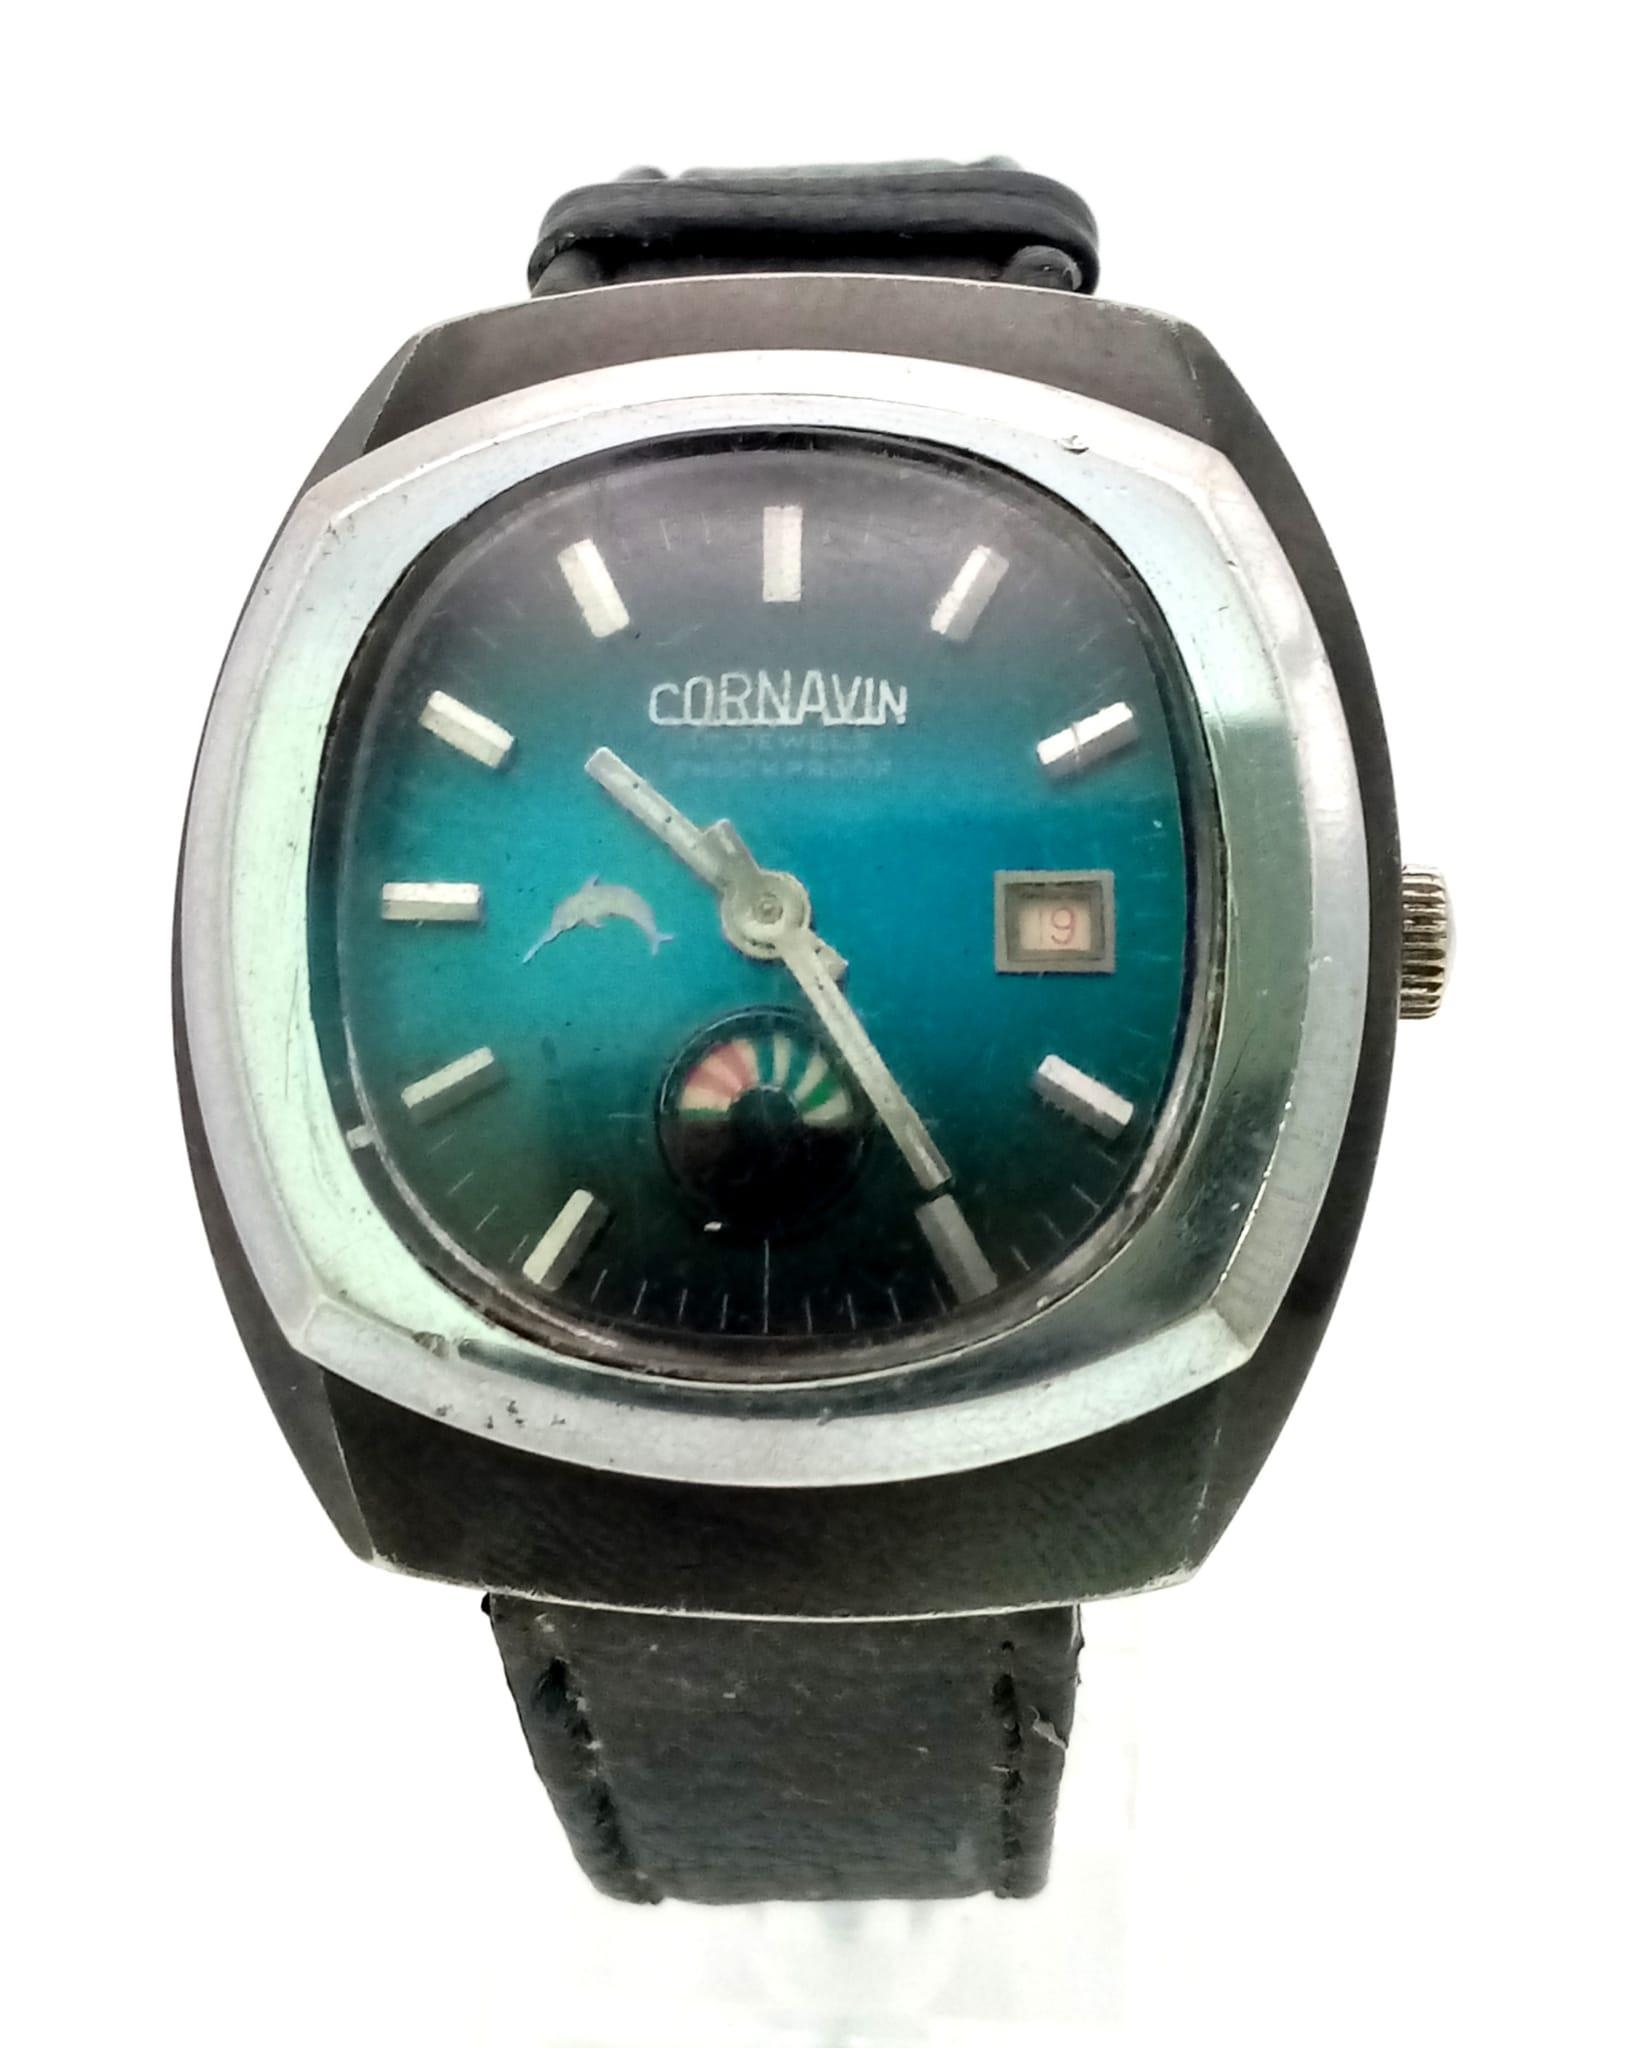 A Rare Cornavin Mystery Watch. Black leather strap. Case - 38mm. Shades of blue dial with date and